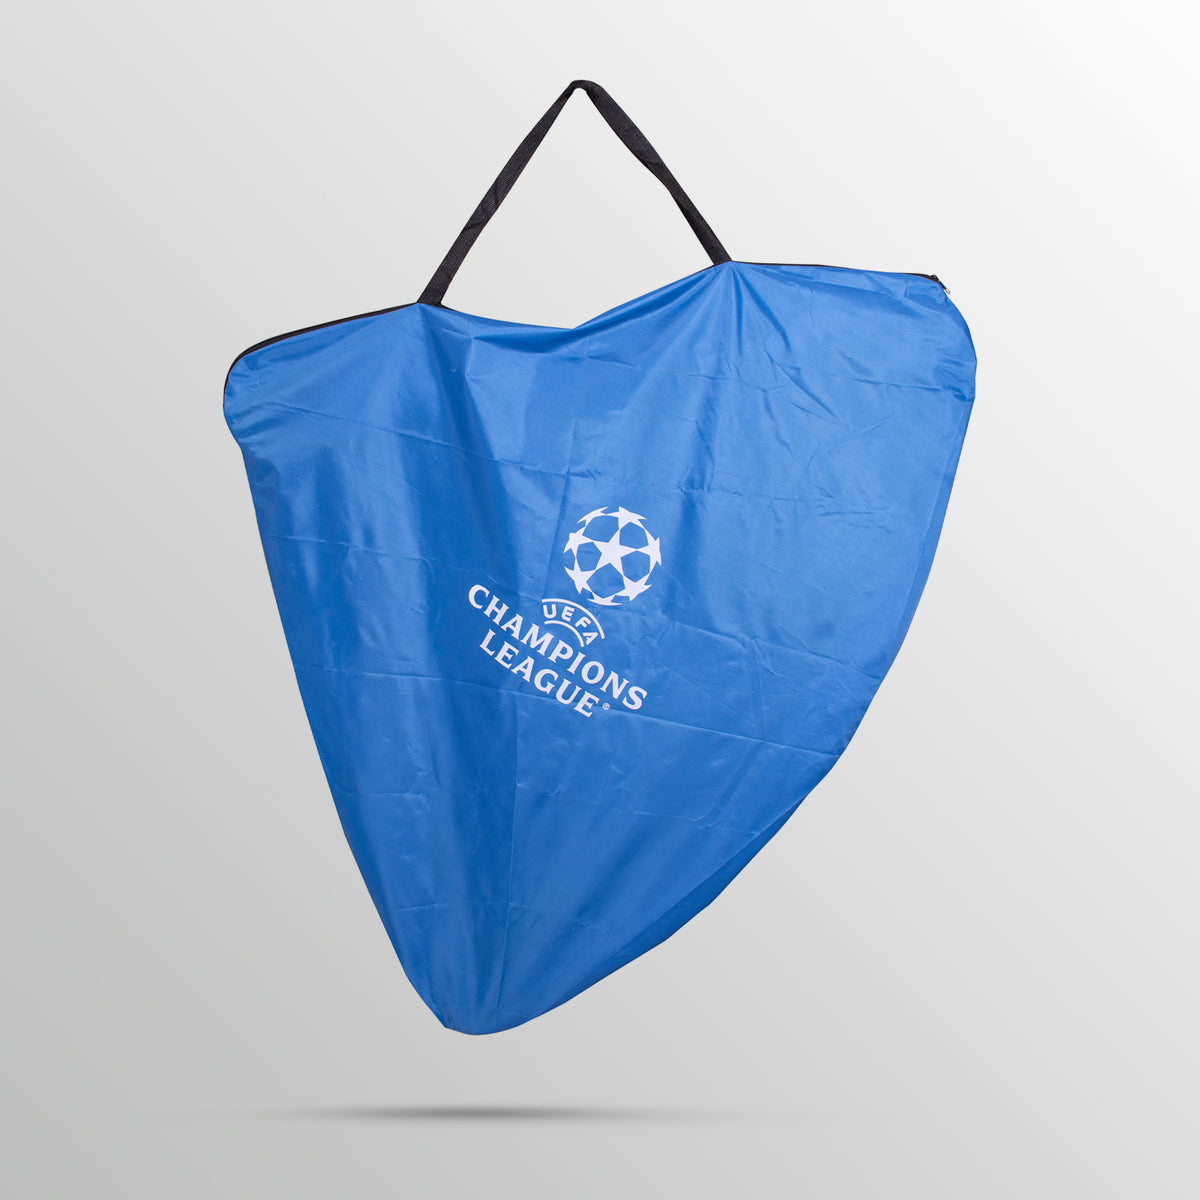 4ft x 3ft Pop-up Flexi Goal UEFA Club Competitions Online Store